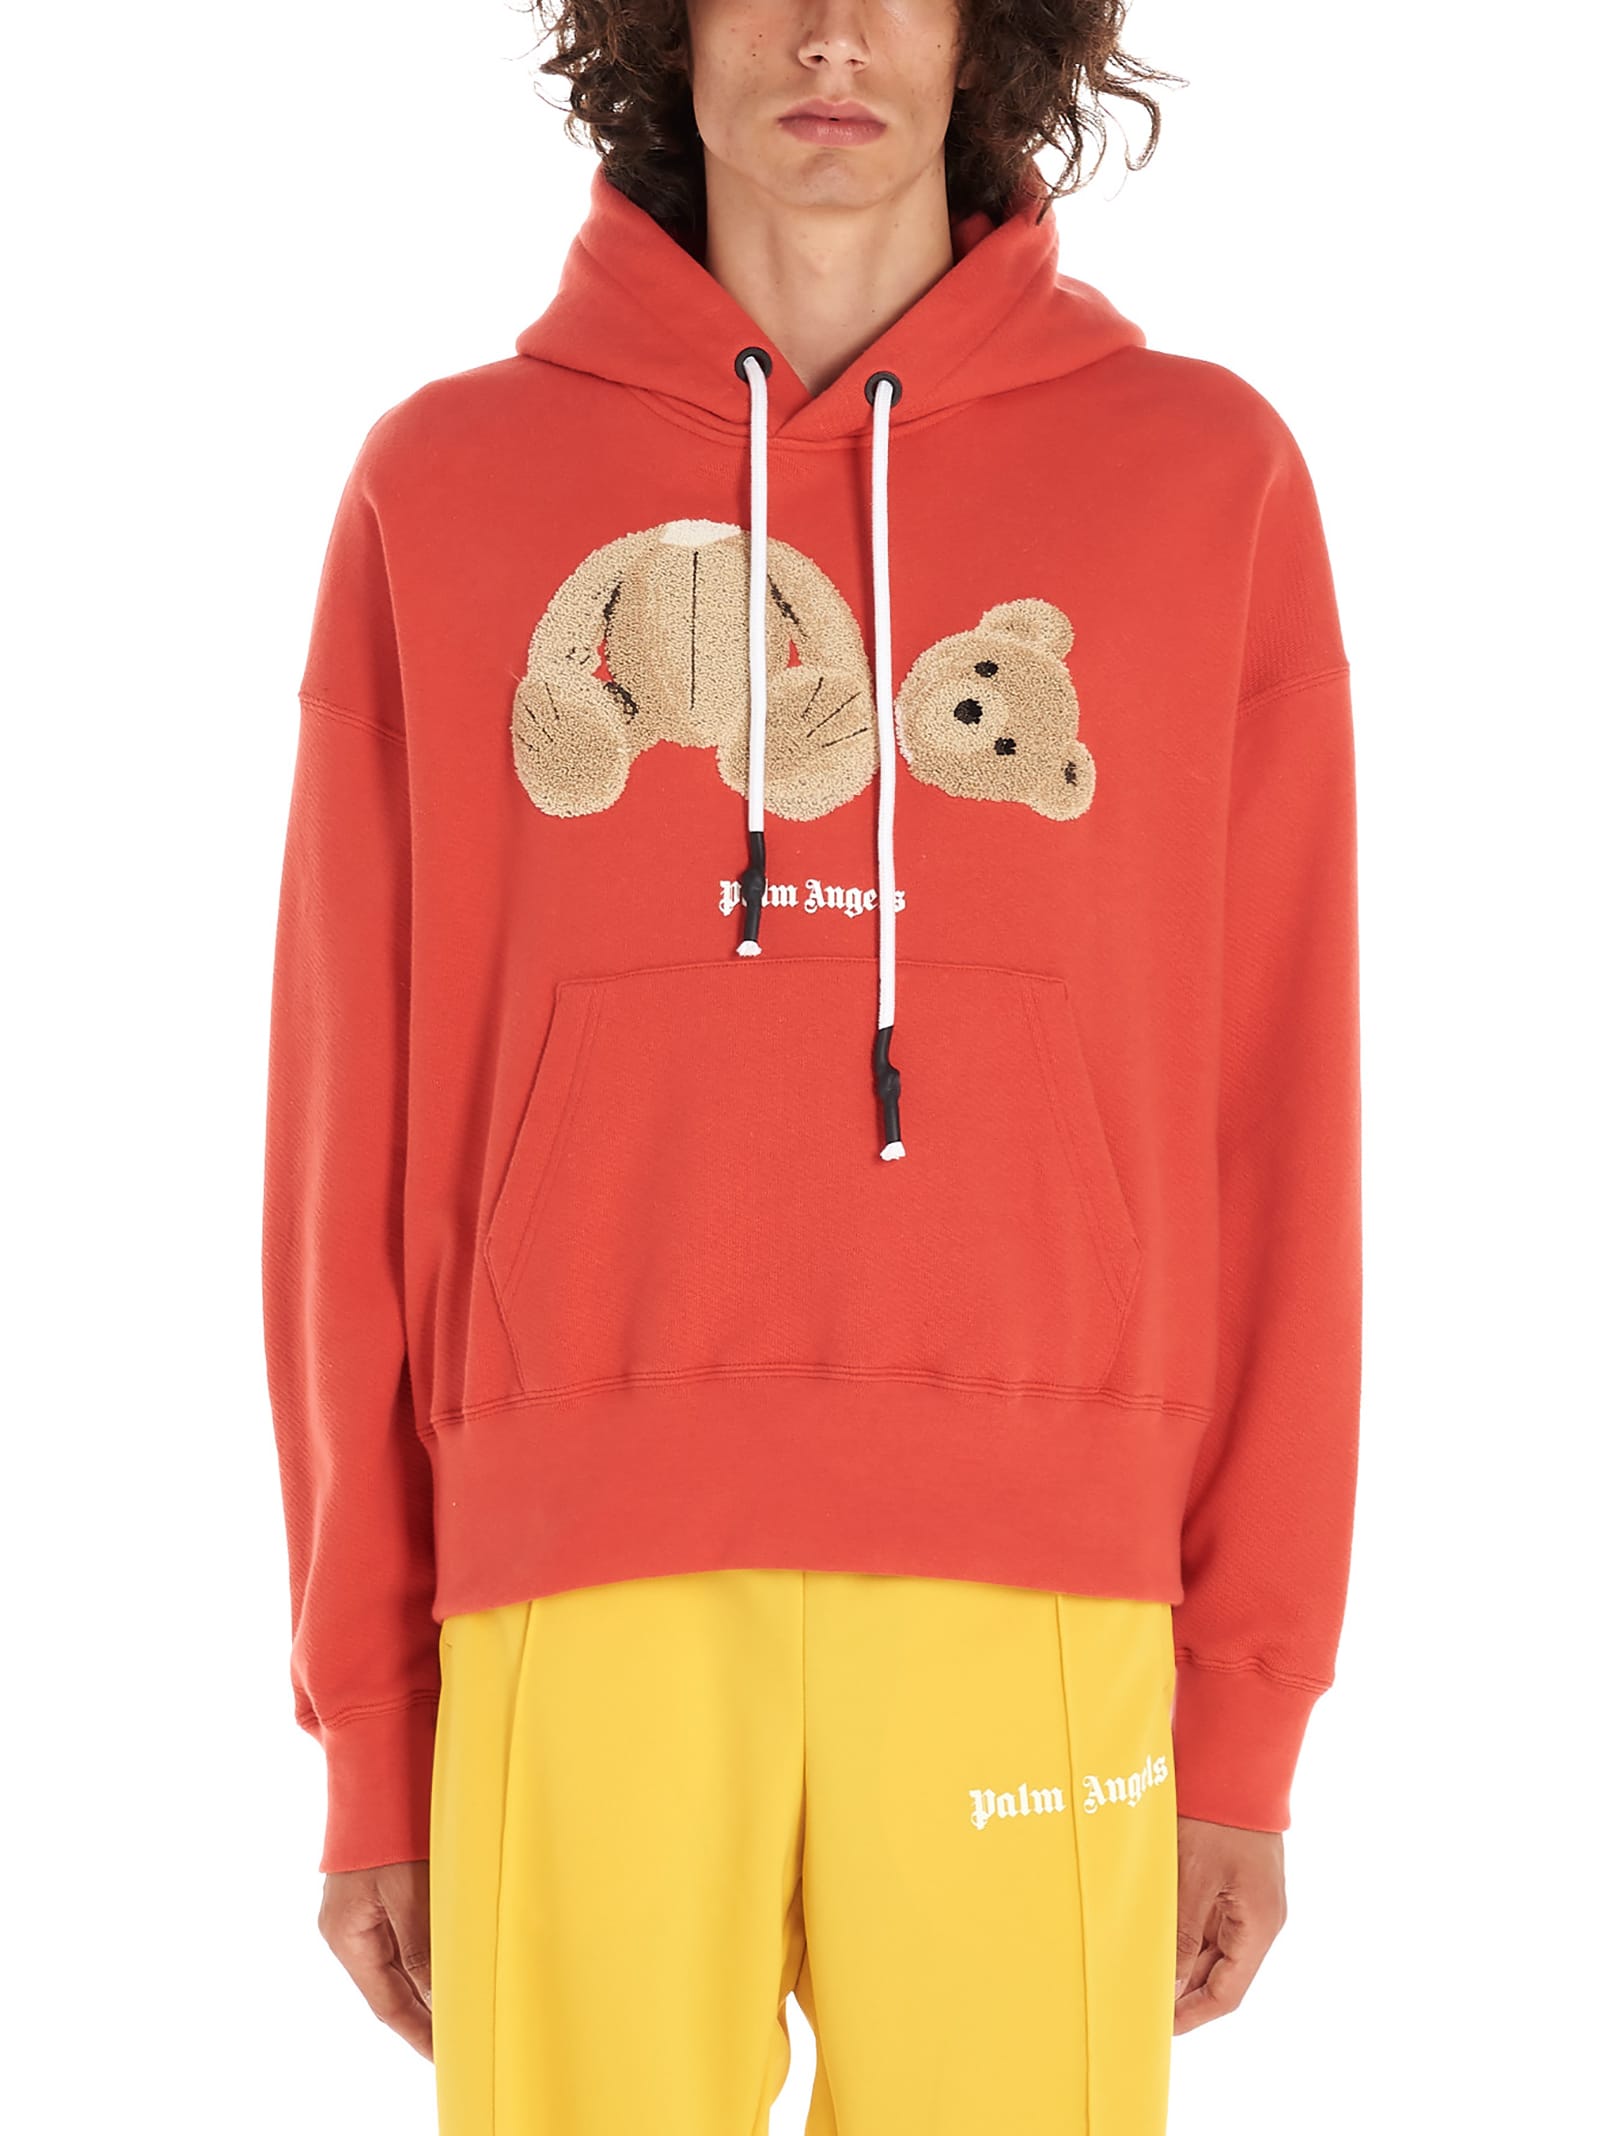 BEAR HOODIE in red - Palm Angels® Official